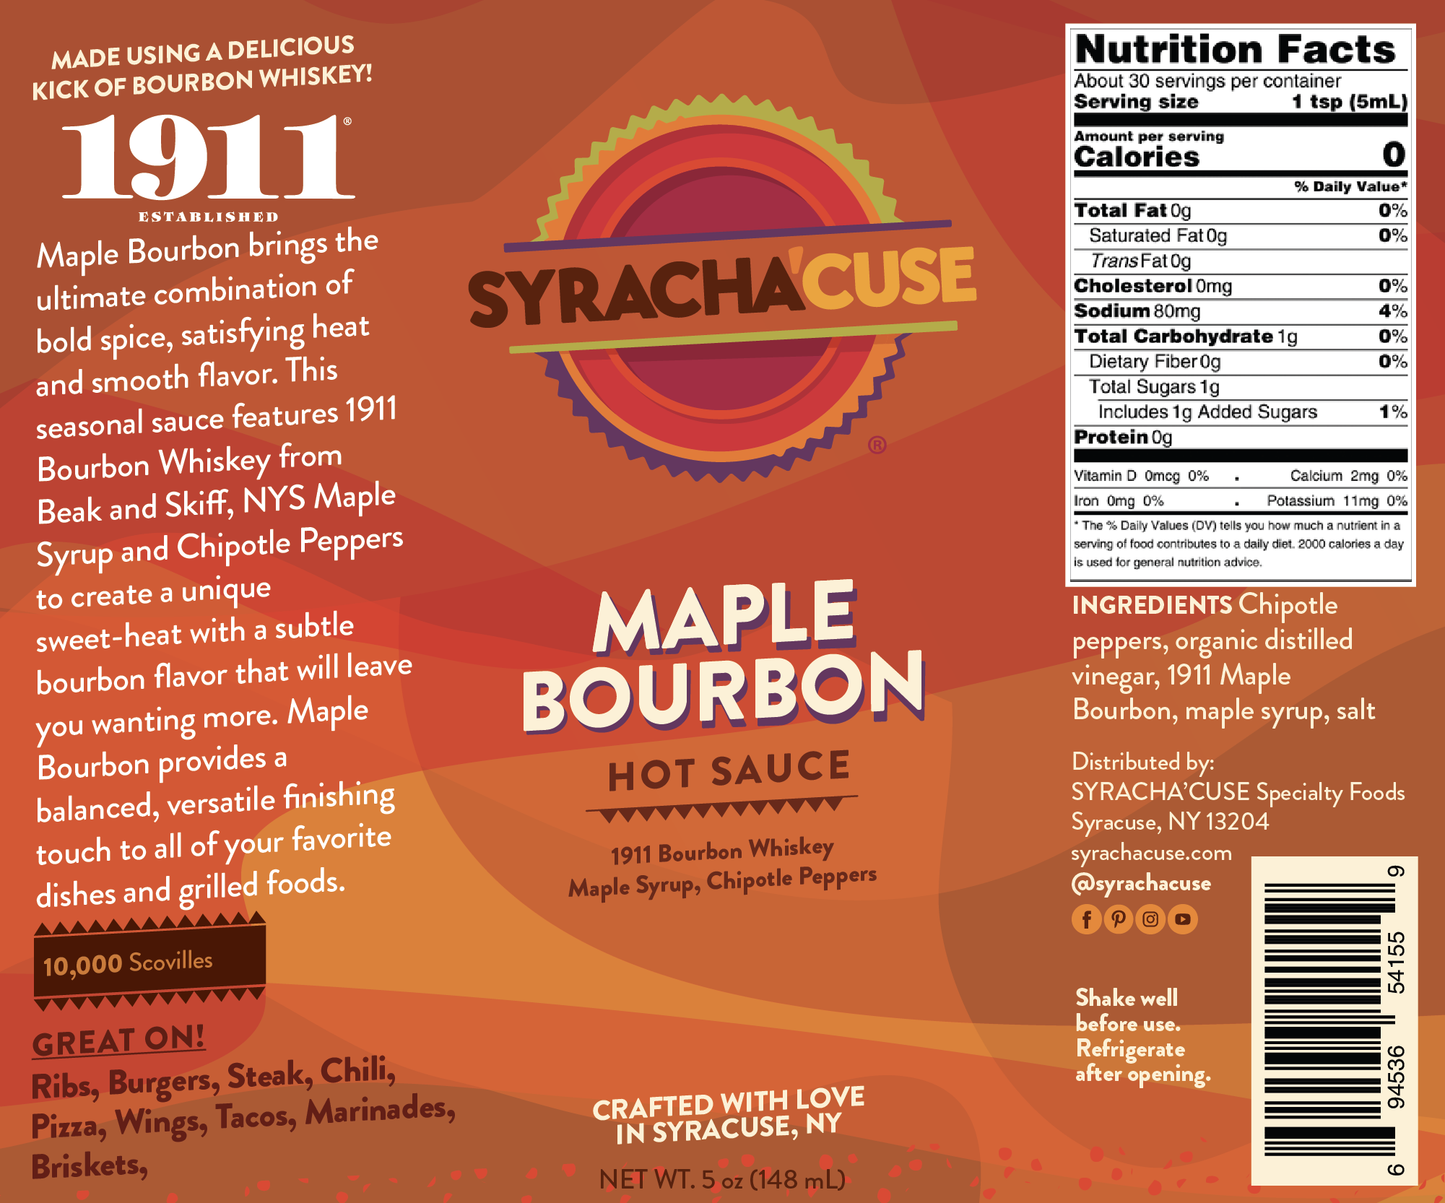 MAPLE BOURBON Hot Sauce Made with 1911 Bourbon Whiskey